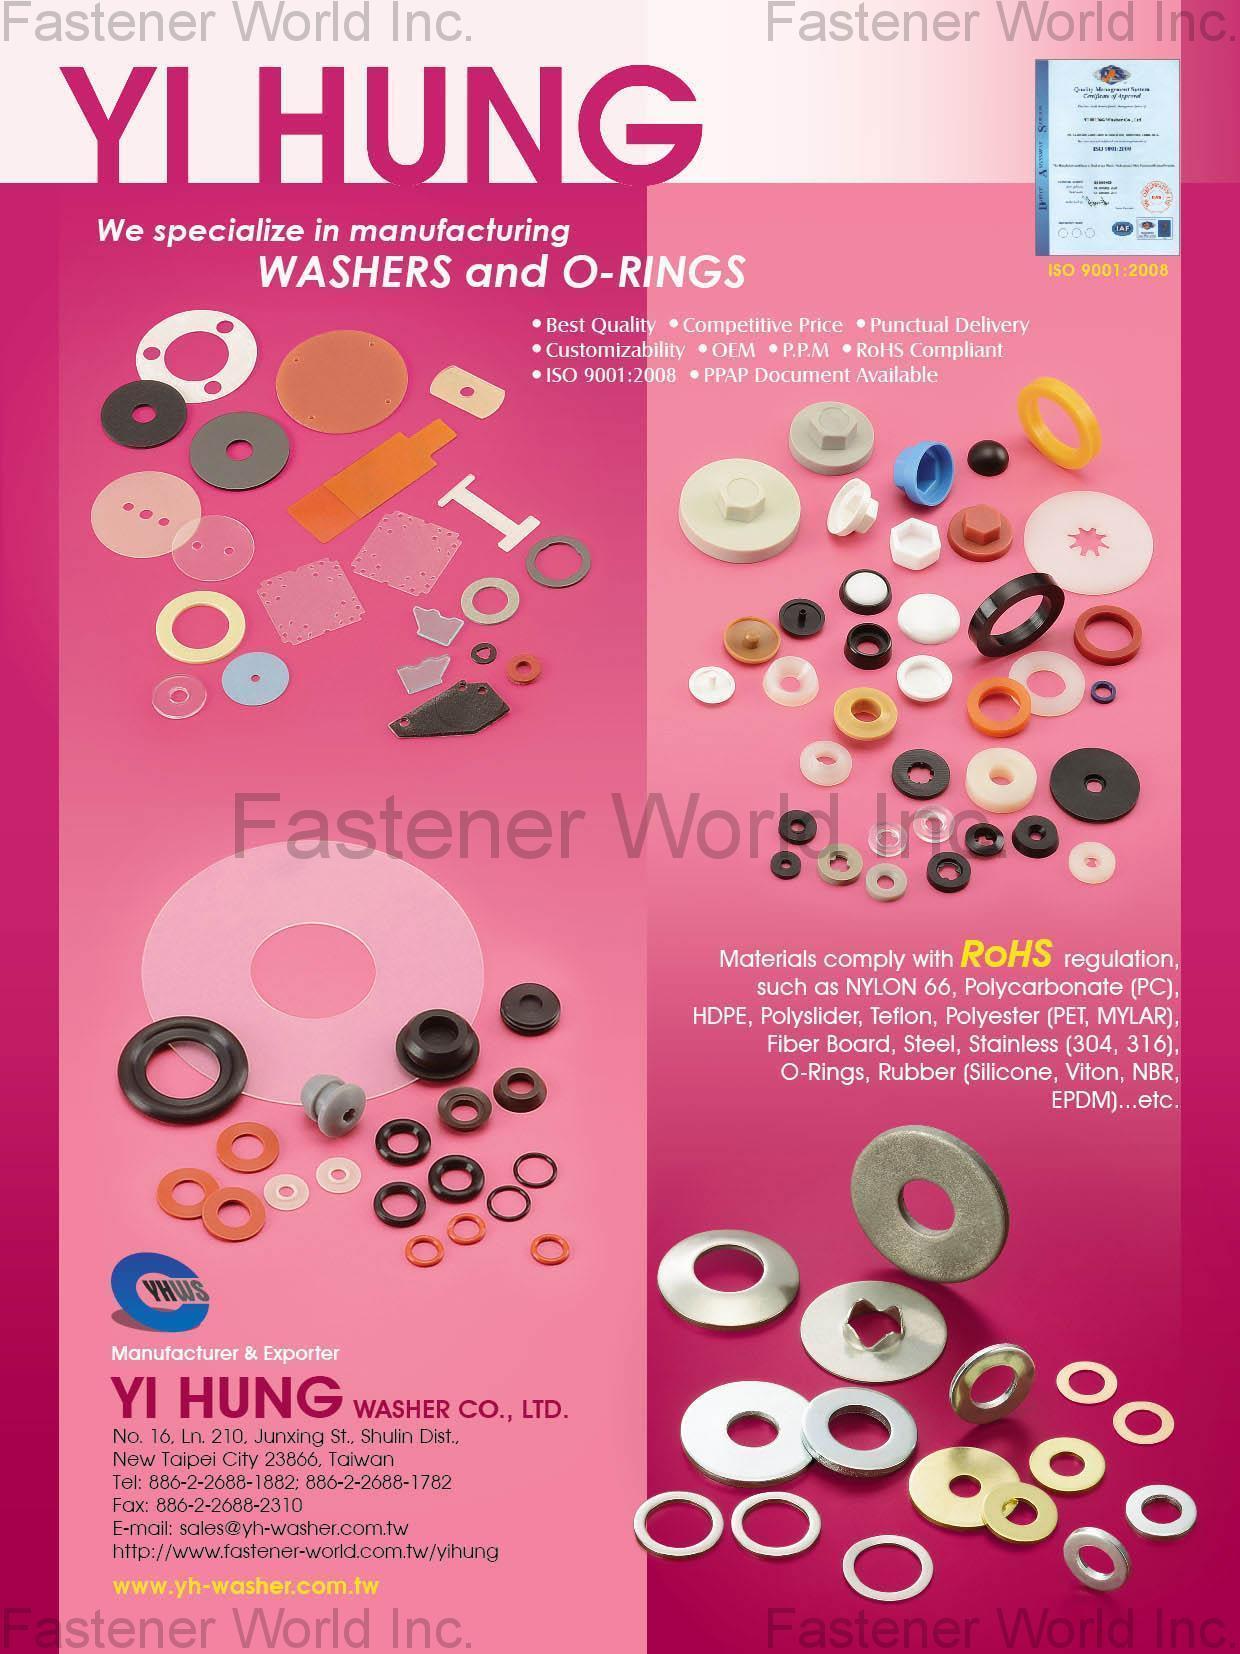 YI HUNG WASHER CO., LTD.  , Plastic Washer (GASKET) , Stamping Parts, O-ring, Oil seal, Dust cover, Bolt, Nut, Plastic Fastener , Washers